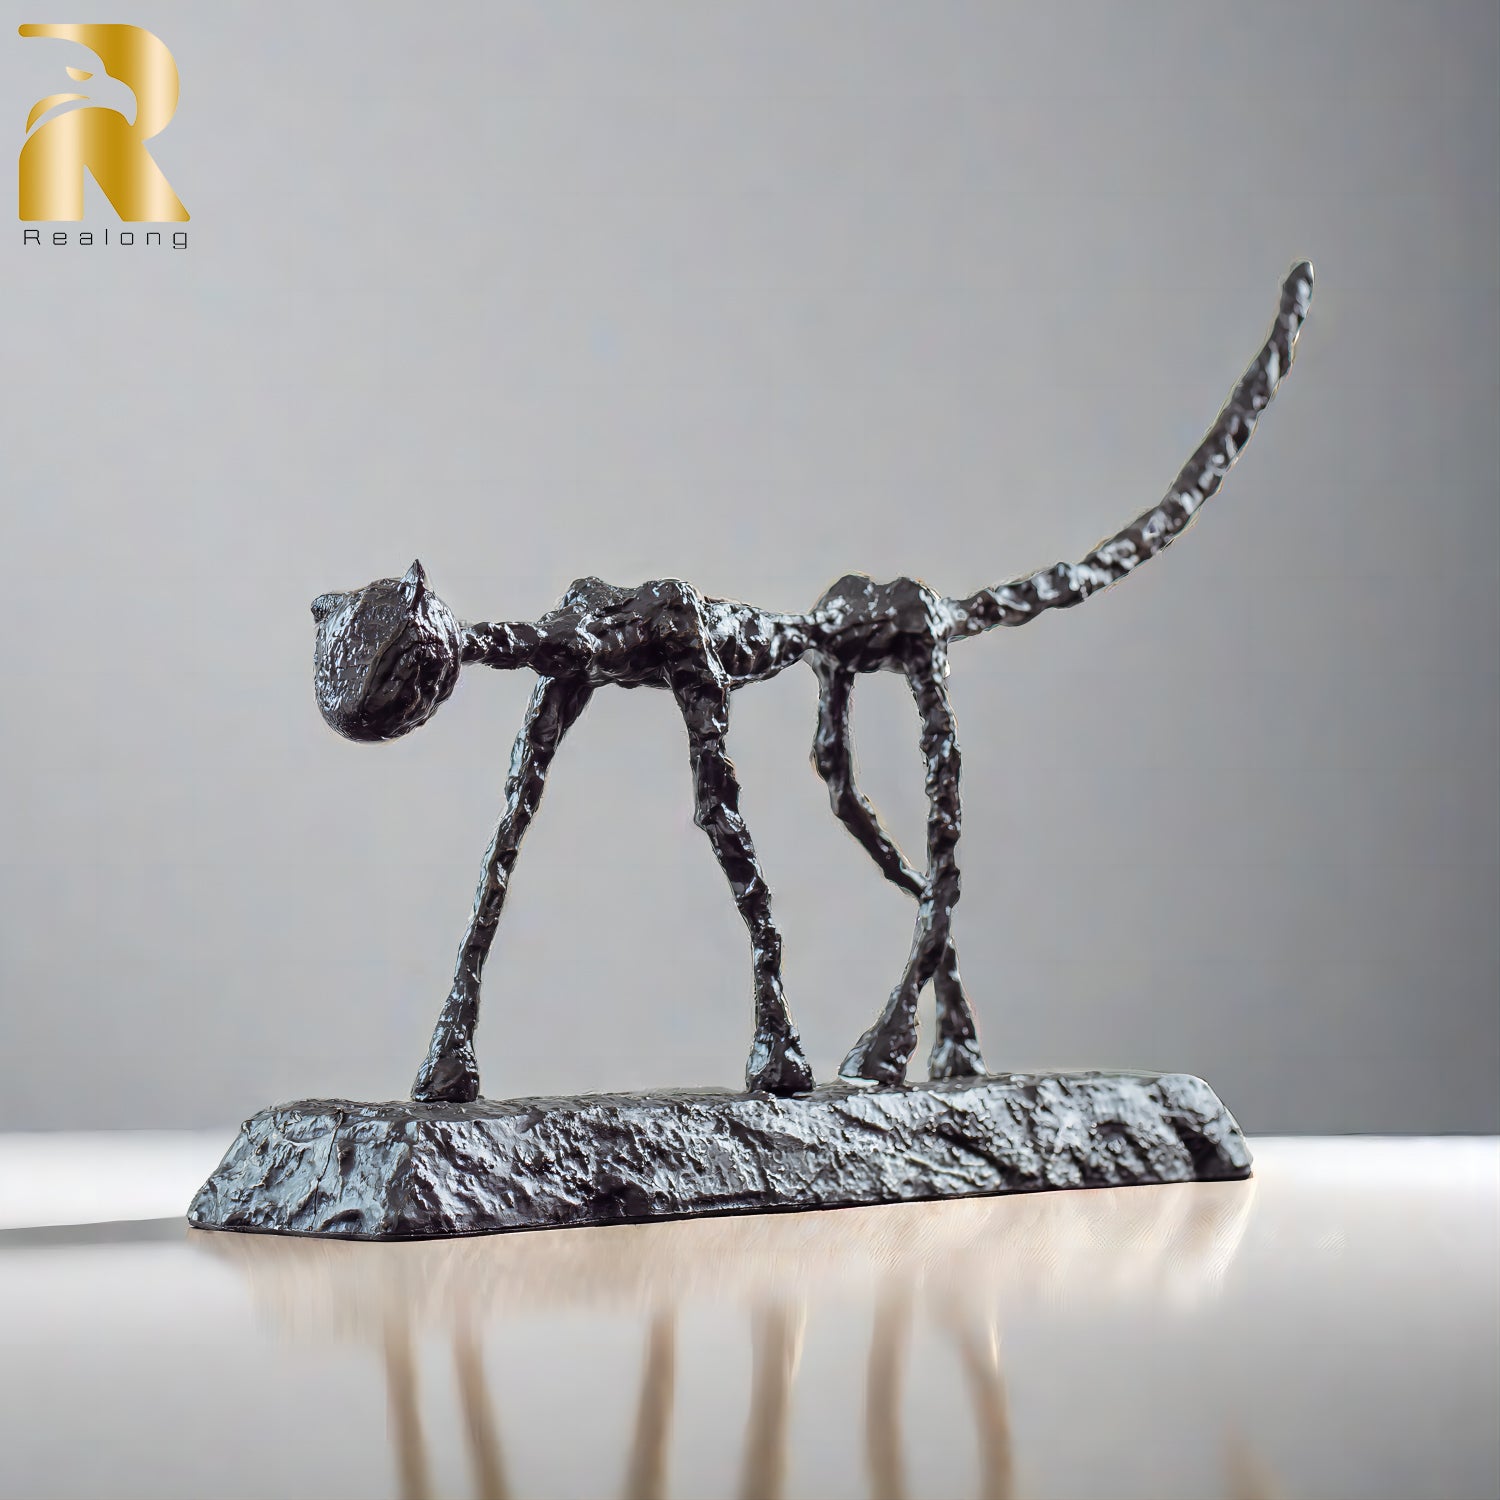 Bronze Cat Statue Antique Giacometti Bronze Animal Sculpture Handmade Abstract Figurines Art Decor Gift Collectible